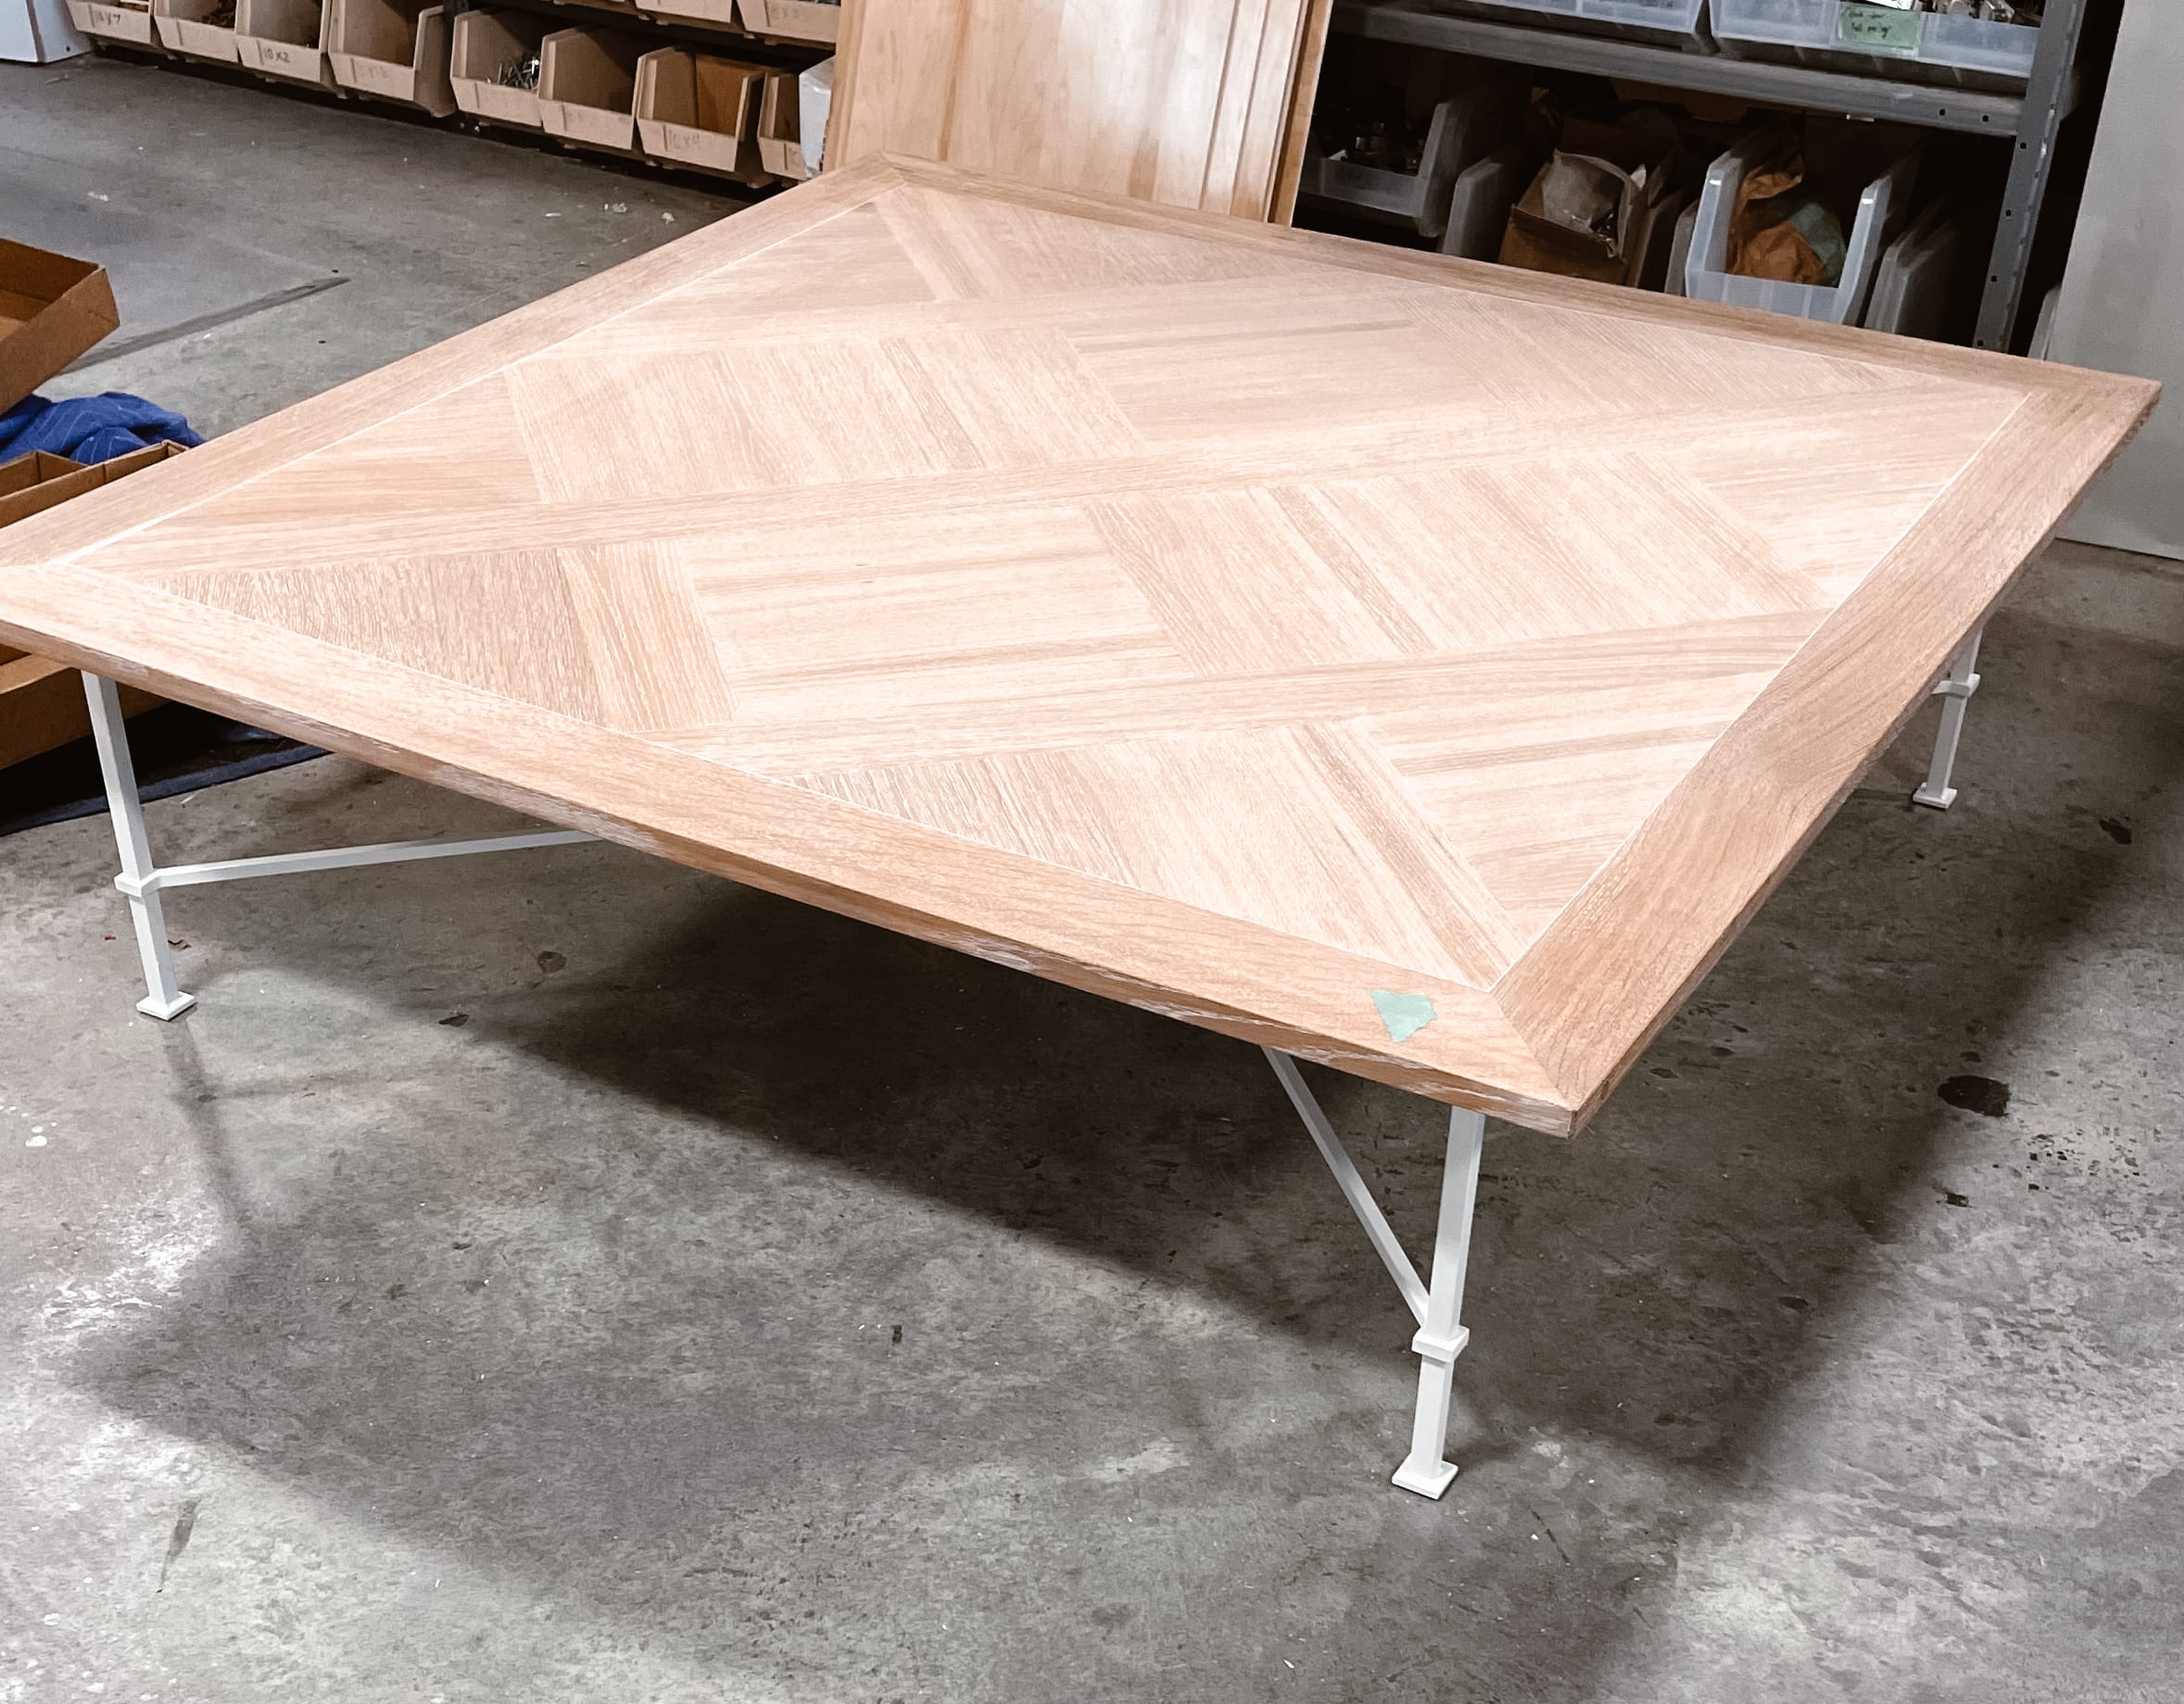 Patterned Wood Dining Table